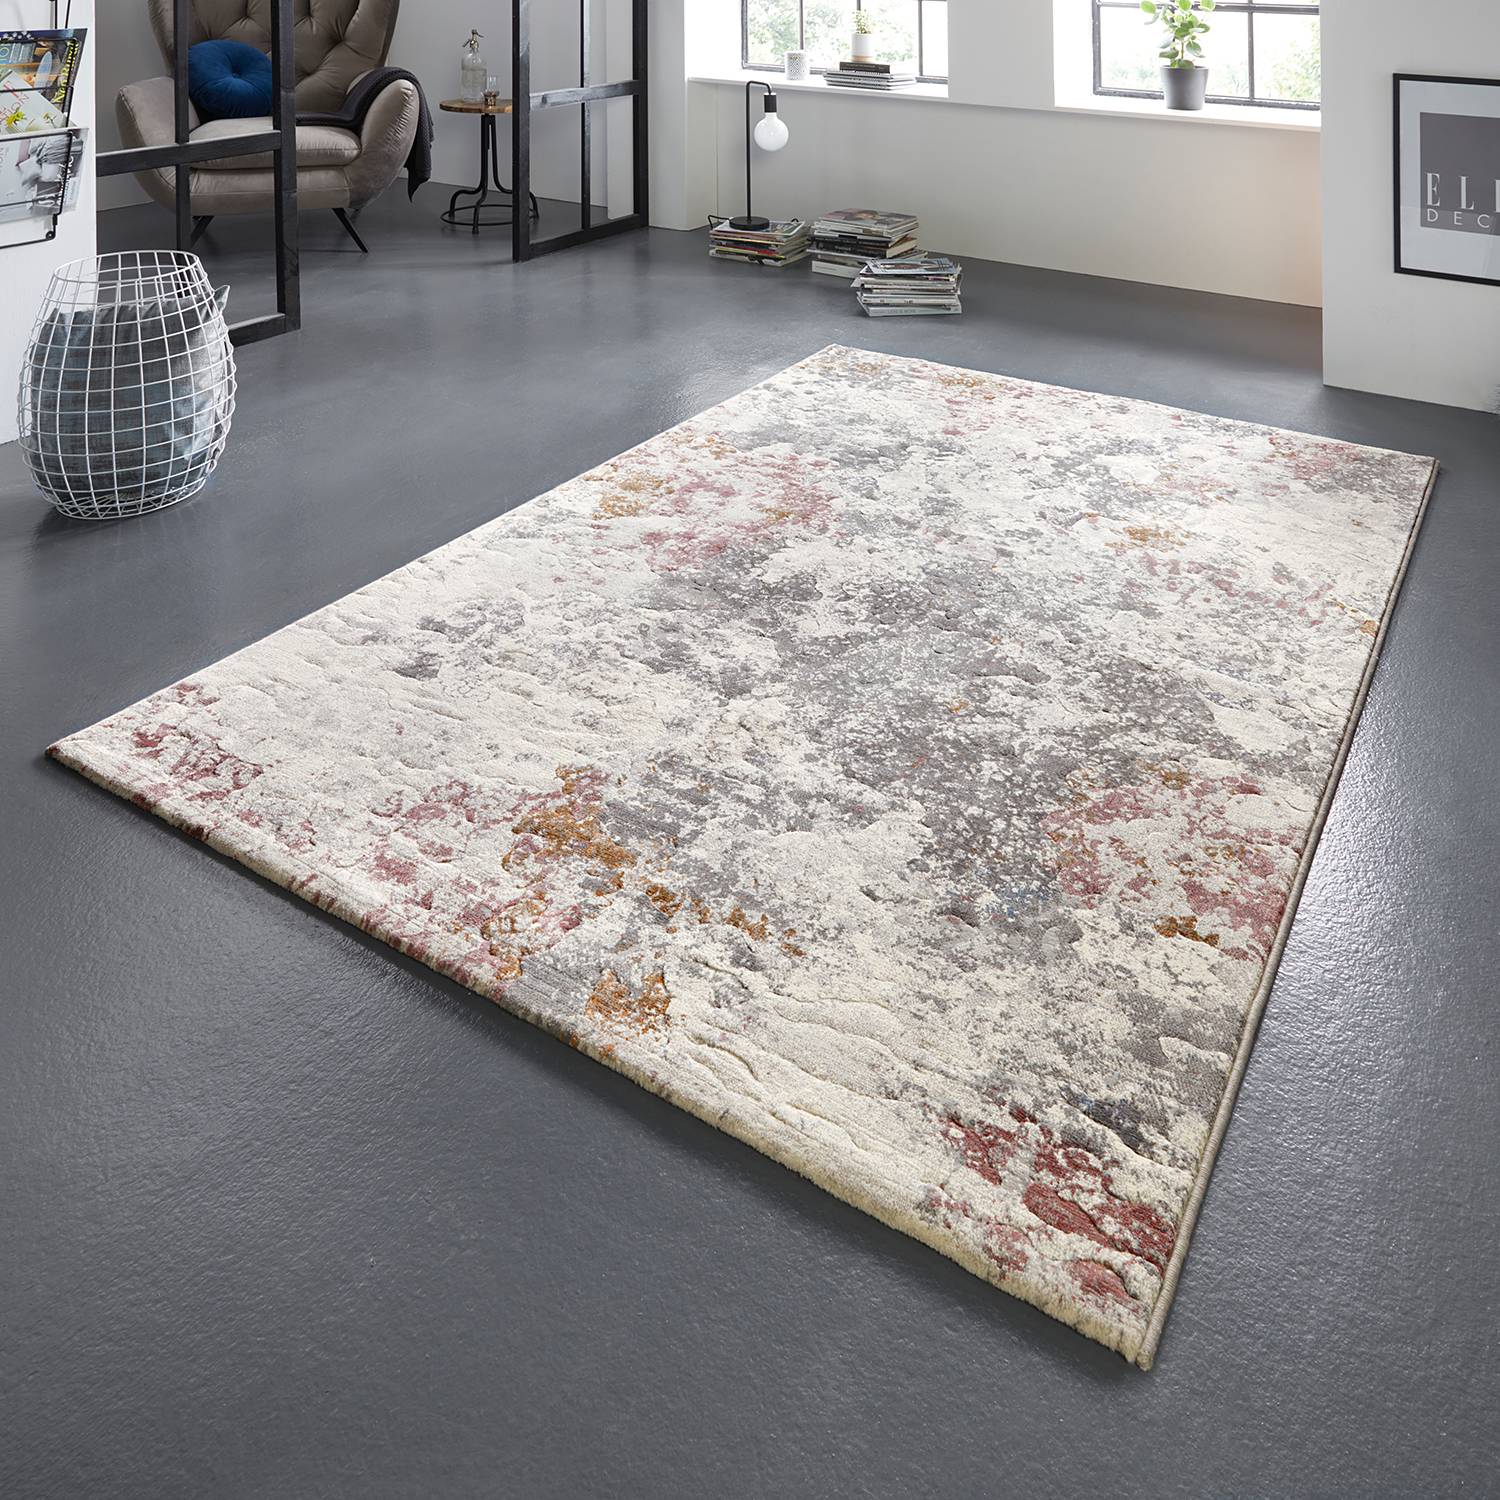 Image of Tapis Fontaine 000000001000168251